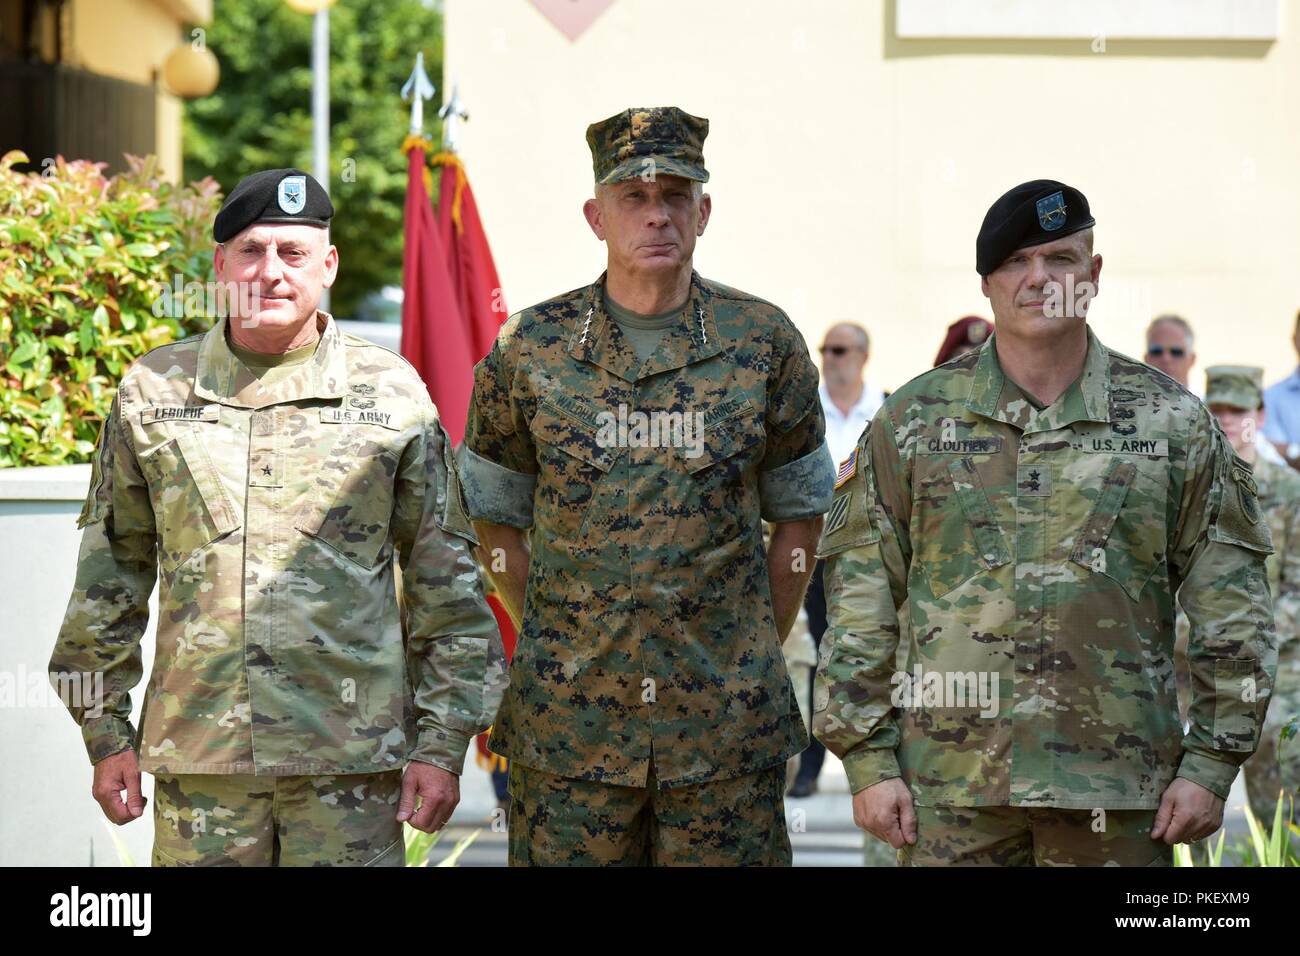 U.S. Marine Corps, Gen. Thomas D. Waldhauser, commander of the U.S. Africa Command (center), Brig. Gen. Eugene J. LeBoeuf, outgoing acting commanding general U.S. Army Africa (left), and Maj. Gen. Roger L. Cloutier, incoming commander U.S. Army Africa (right), prepare to take their positions on the parade field during the U.S. Army Africa-Southern European Task Force change of command ceremony at Caserma Carlo Ederle in Vicenza, Italy, August 2, 2018. Stock Photo